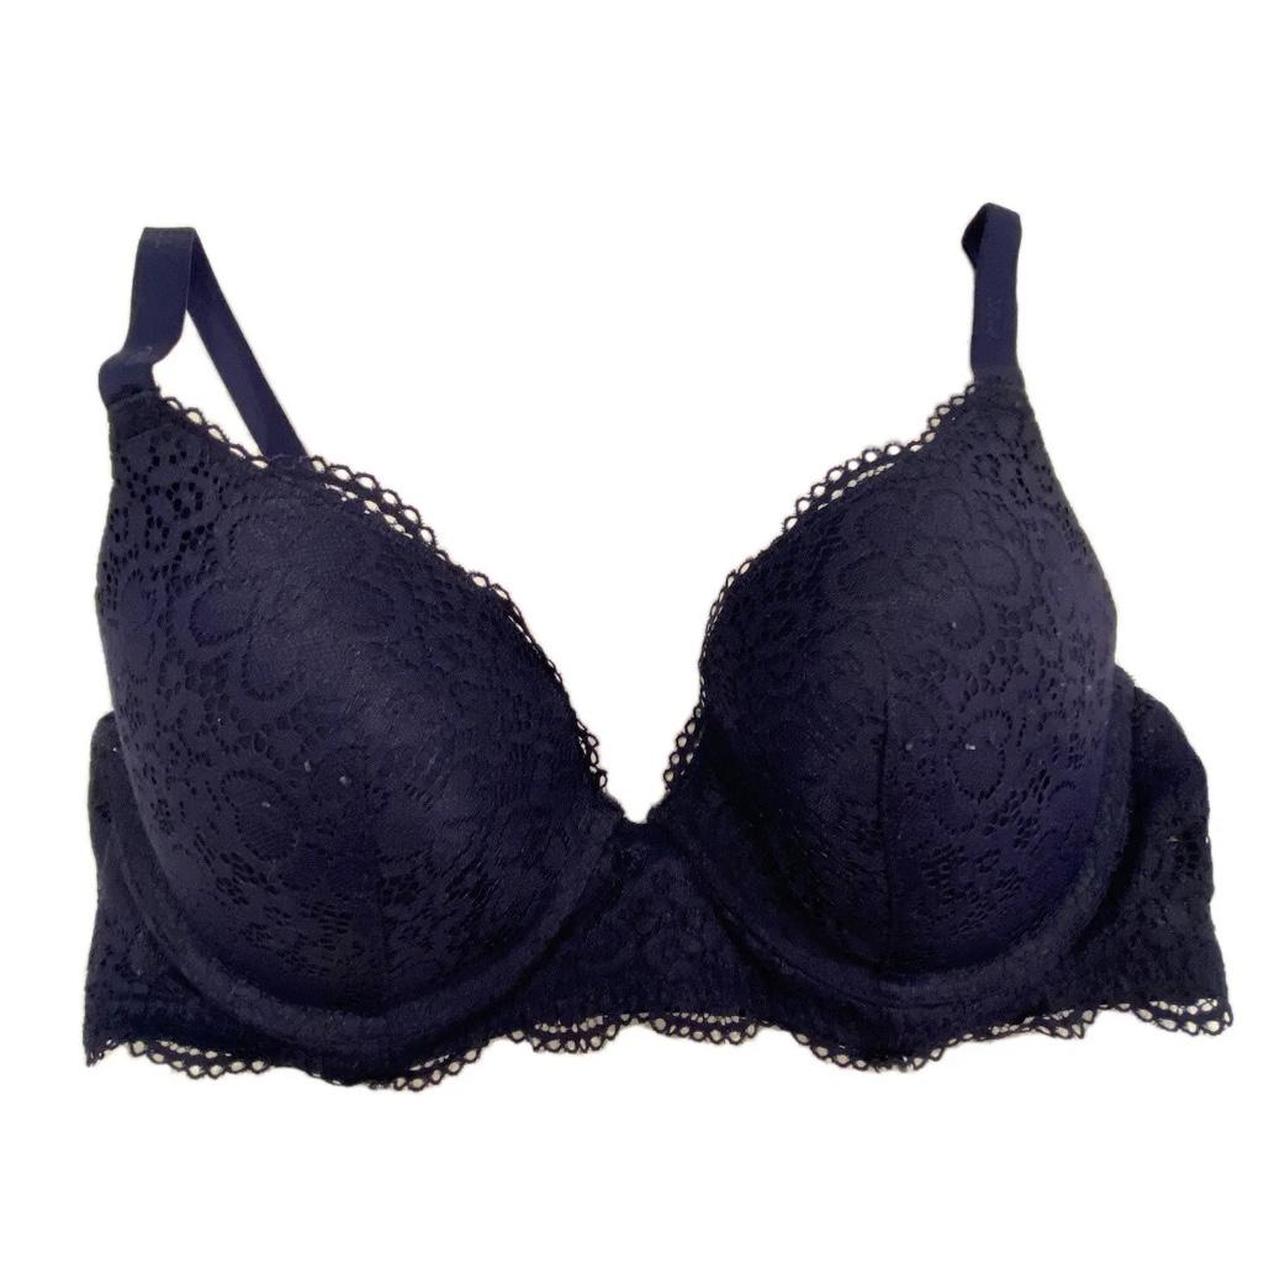 Aerie push up black lace bra with 3 clasps in the - Depop